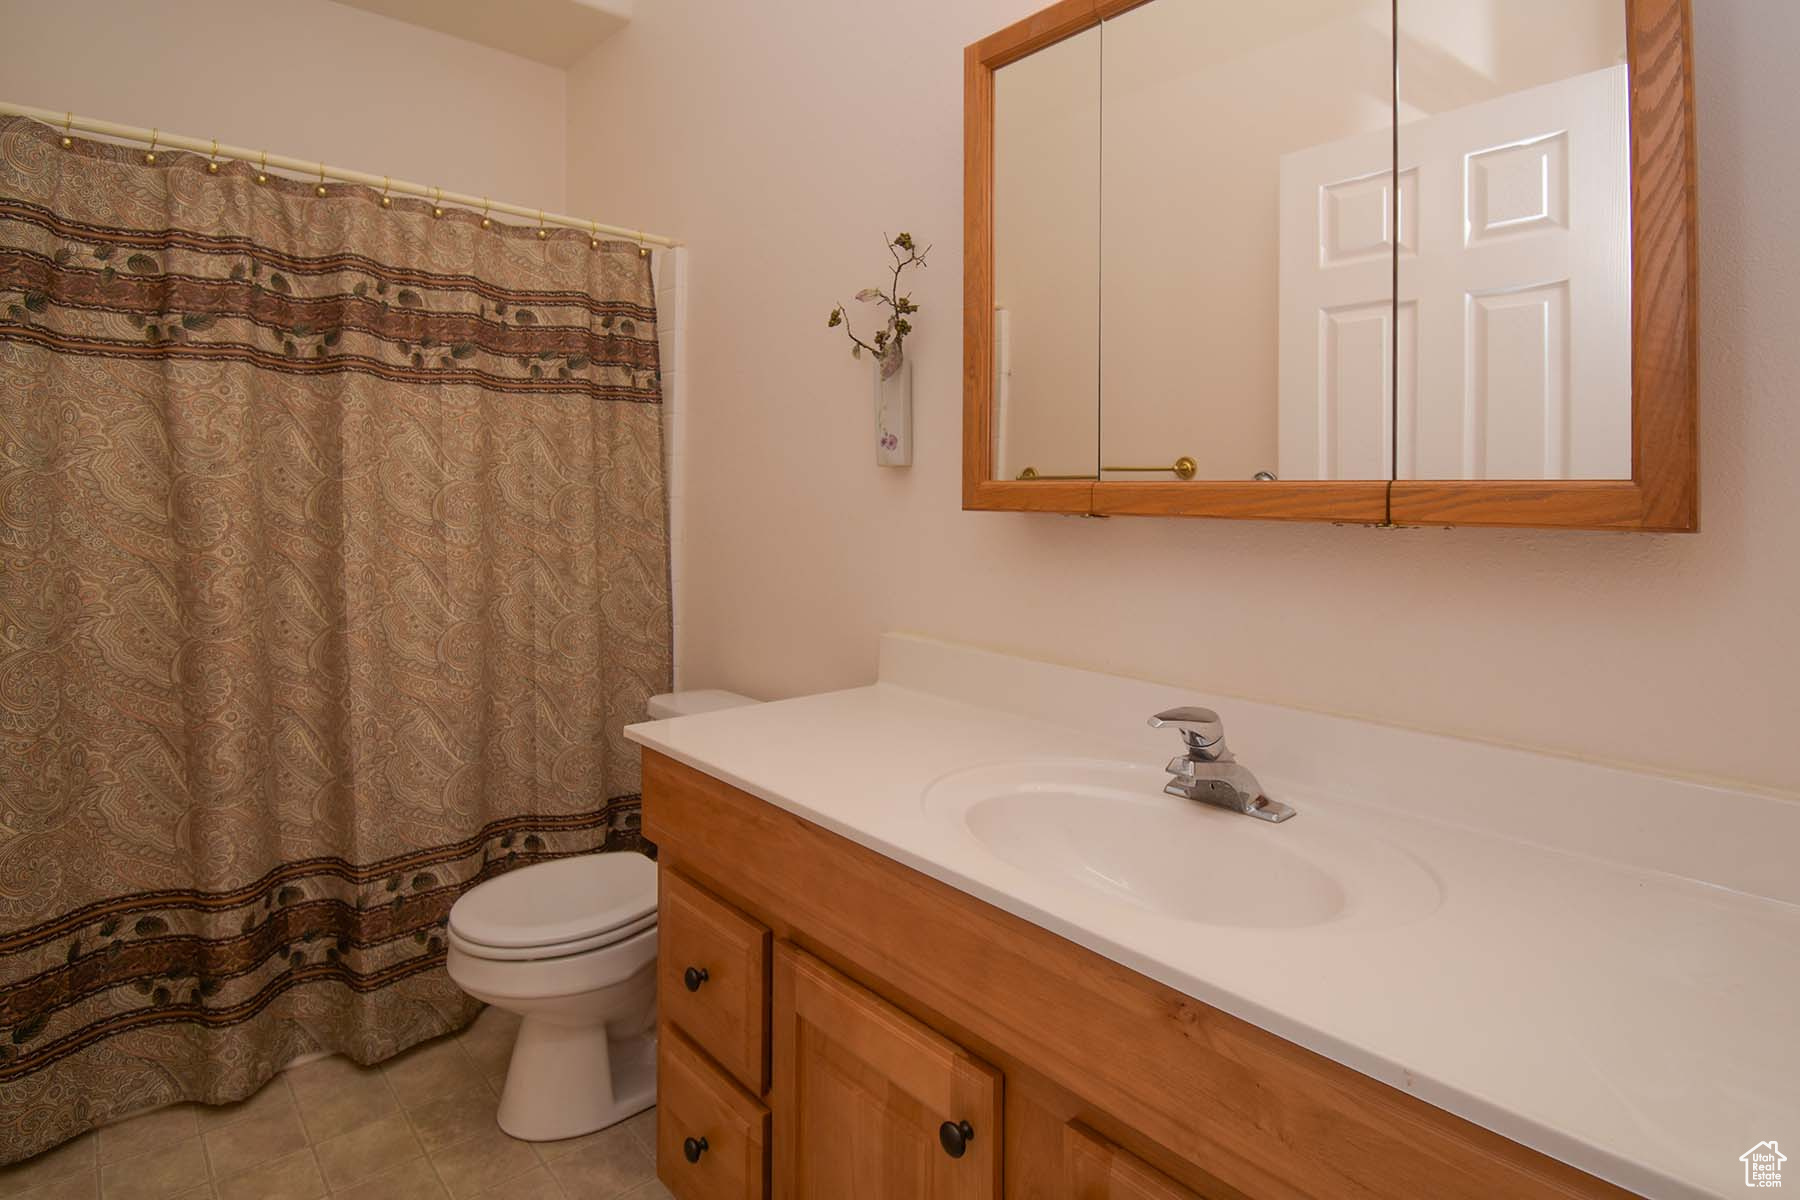 Guest bathroom with toilet, tile flooring, and oversized vanity